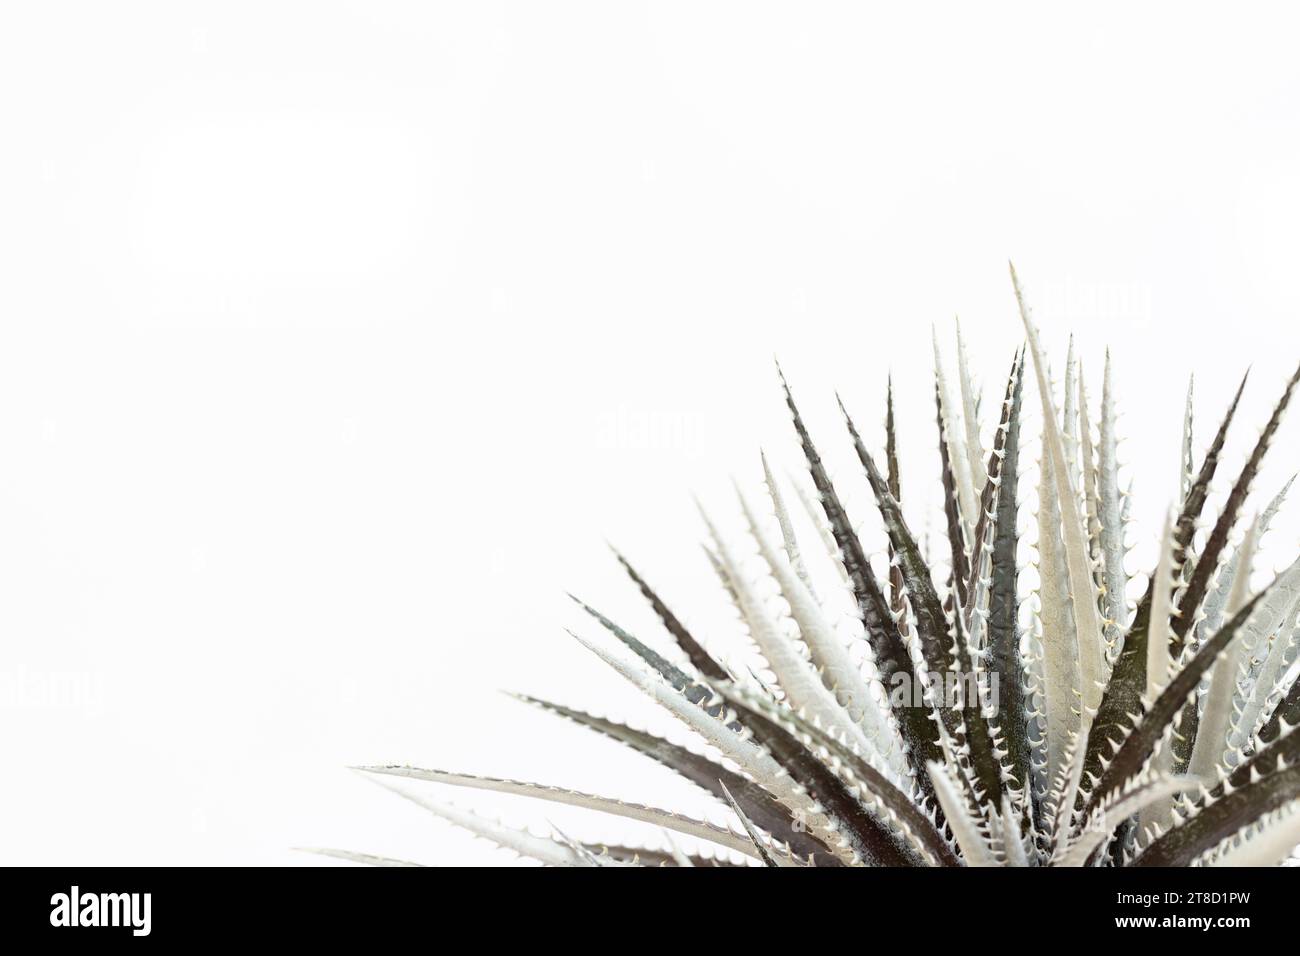 Black leaves of Dyckia plant on white background with copy space Stock Photo